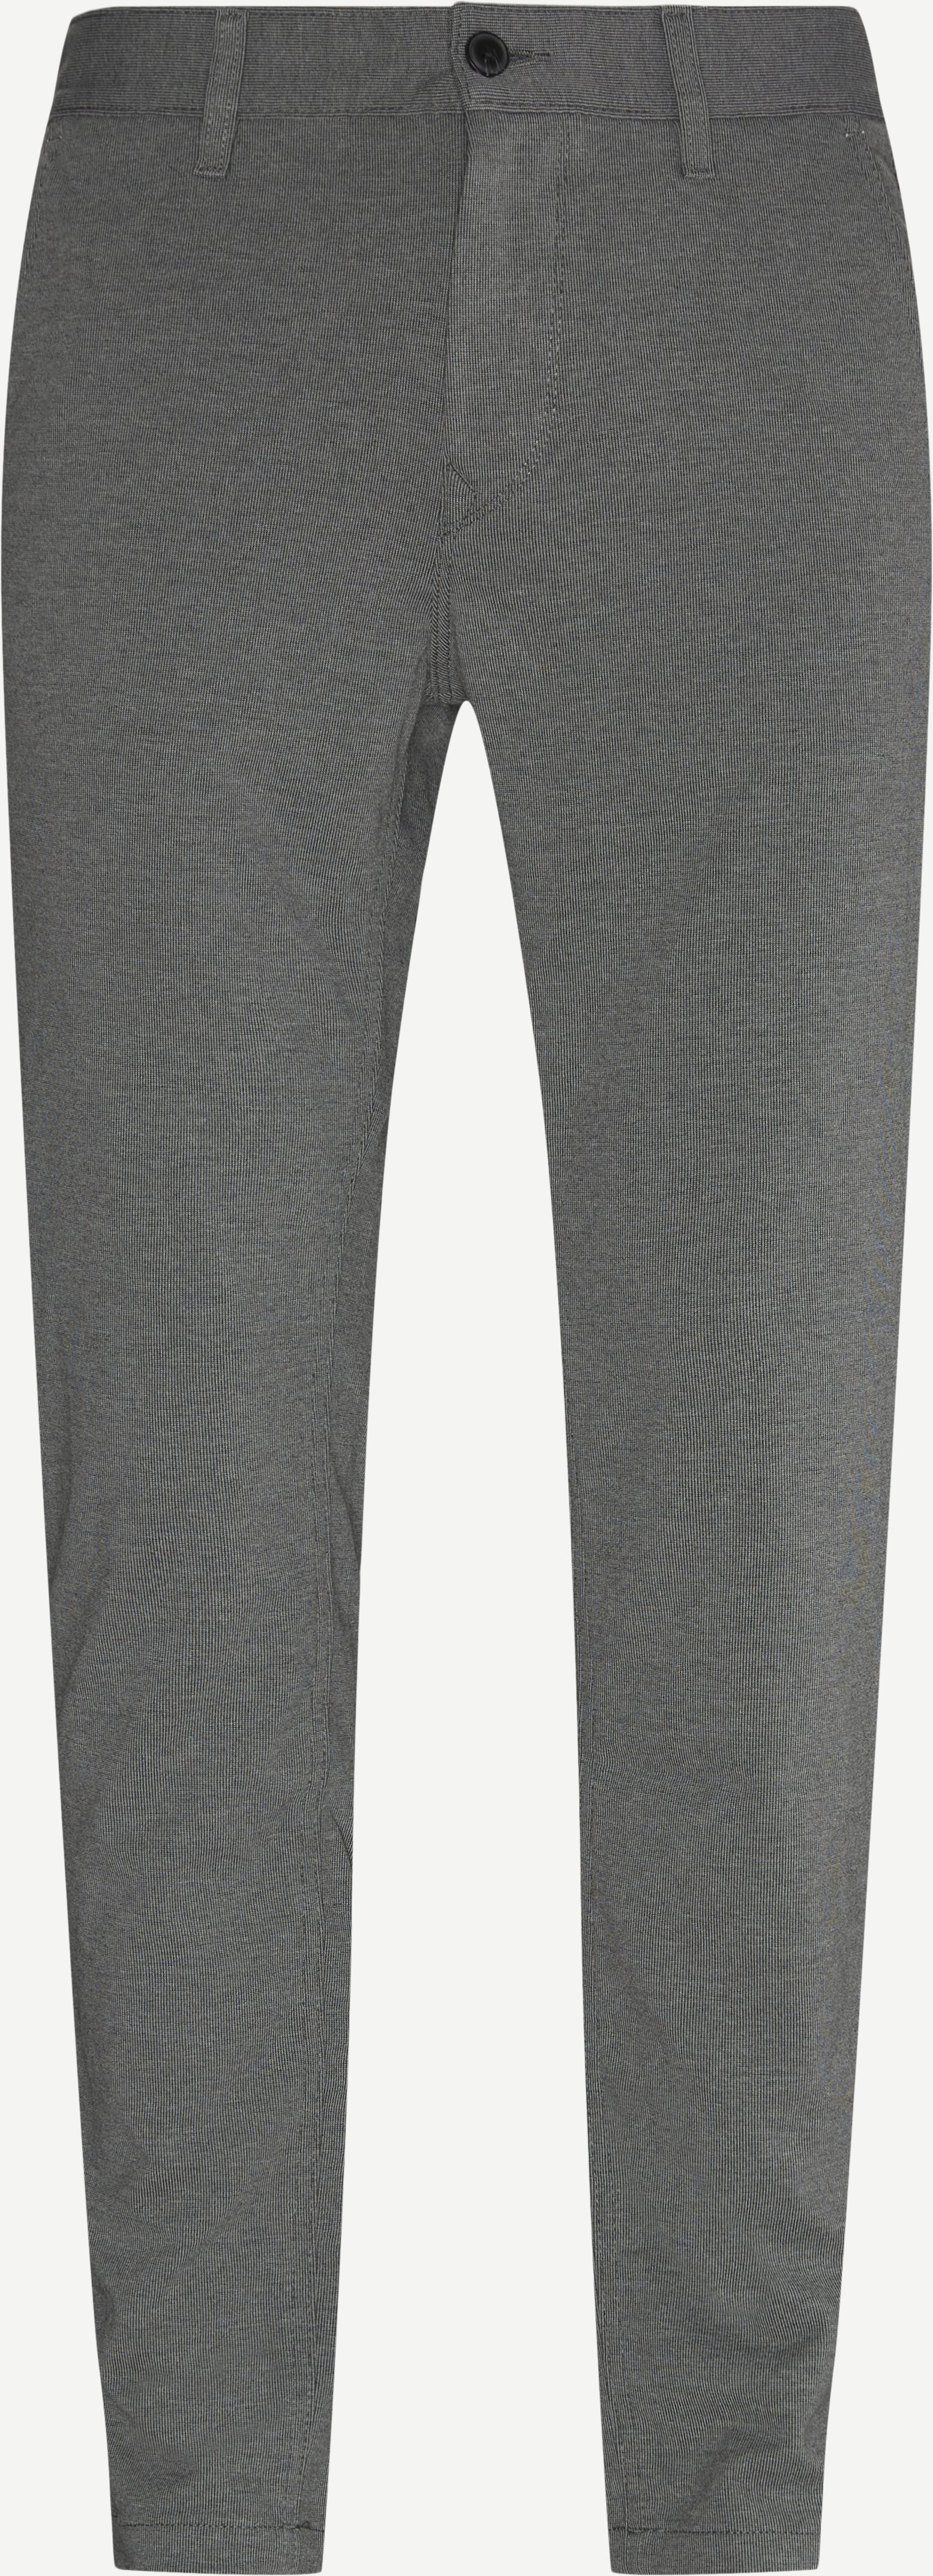 Schino-Taber Chino - Trousers - Tapered fit - Grey